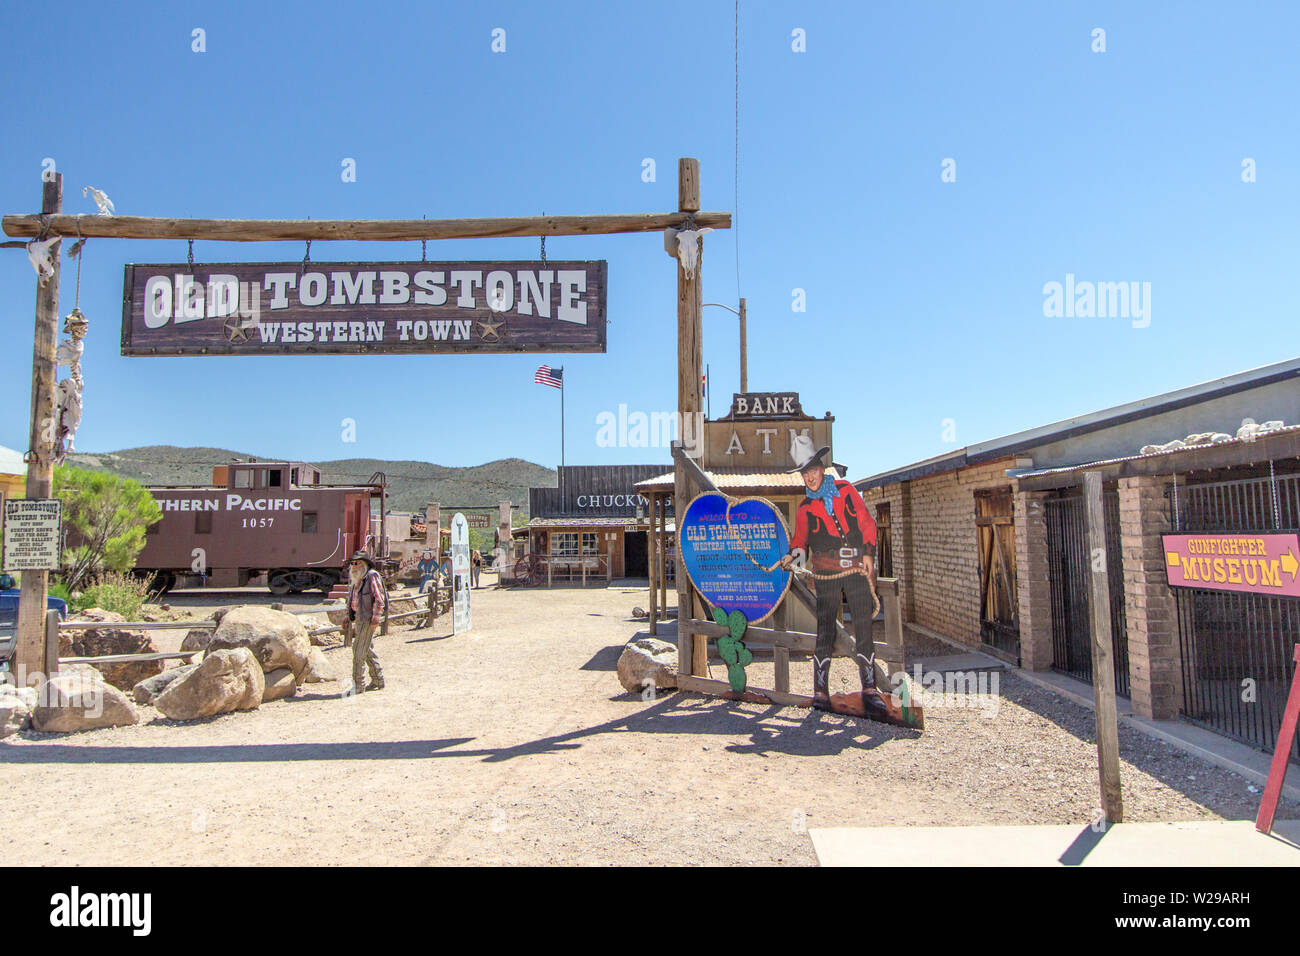 Tombstone, Arizona, USA - May 1, 2019: Wild West frontier style facade of the Old Western Theme Park in Tombstone Arizona. Stock Photo